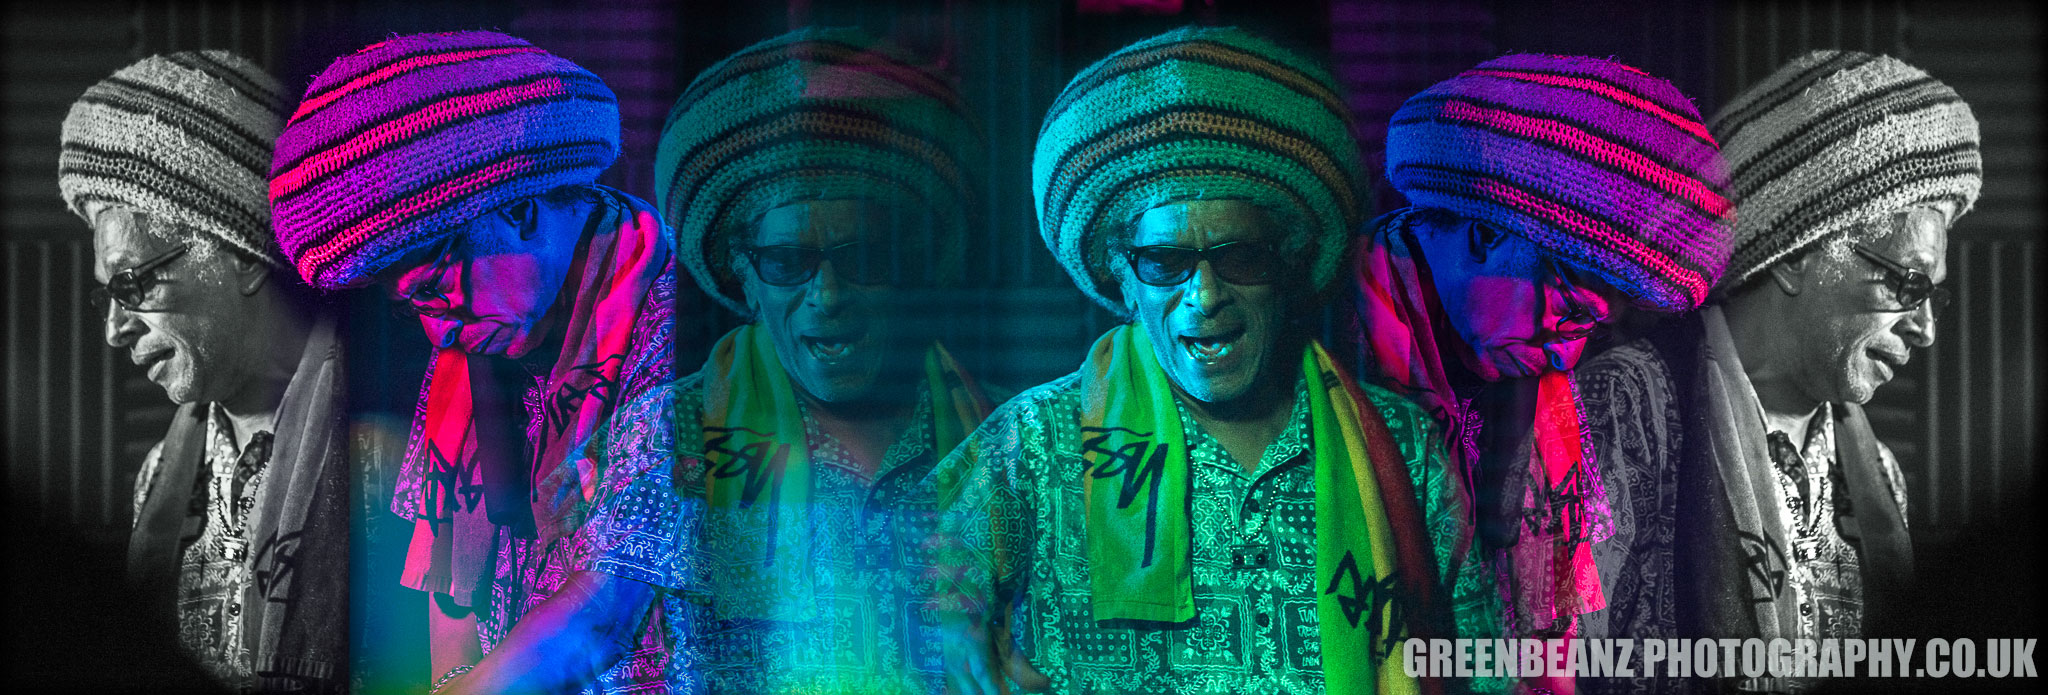 Legendary DJ and Filmaker Don Letts at The Junction Plymouth 01st June 2018